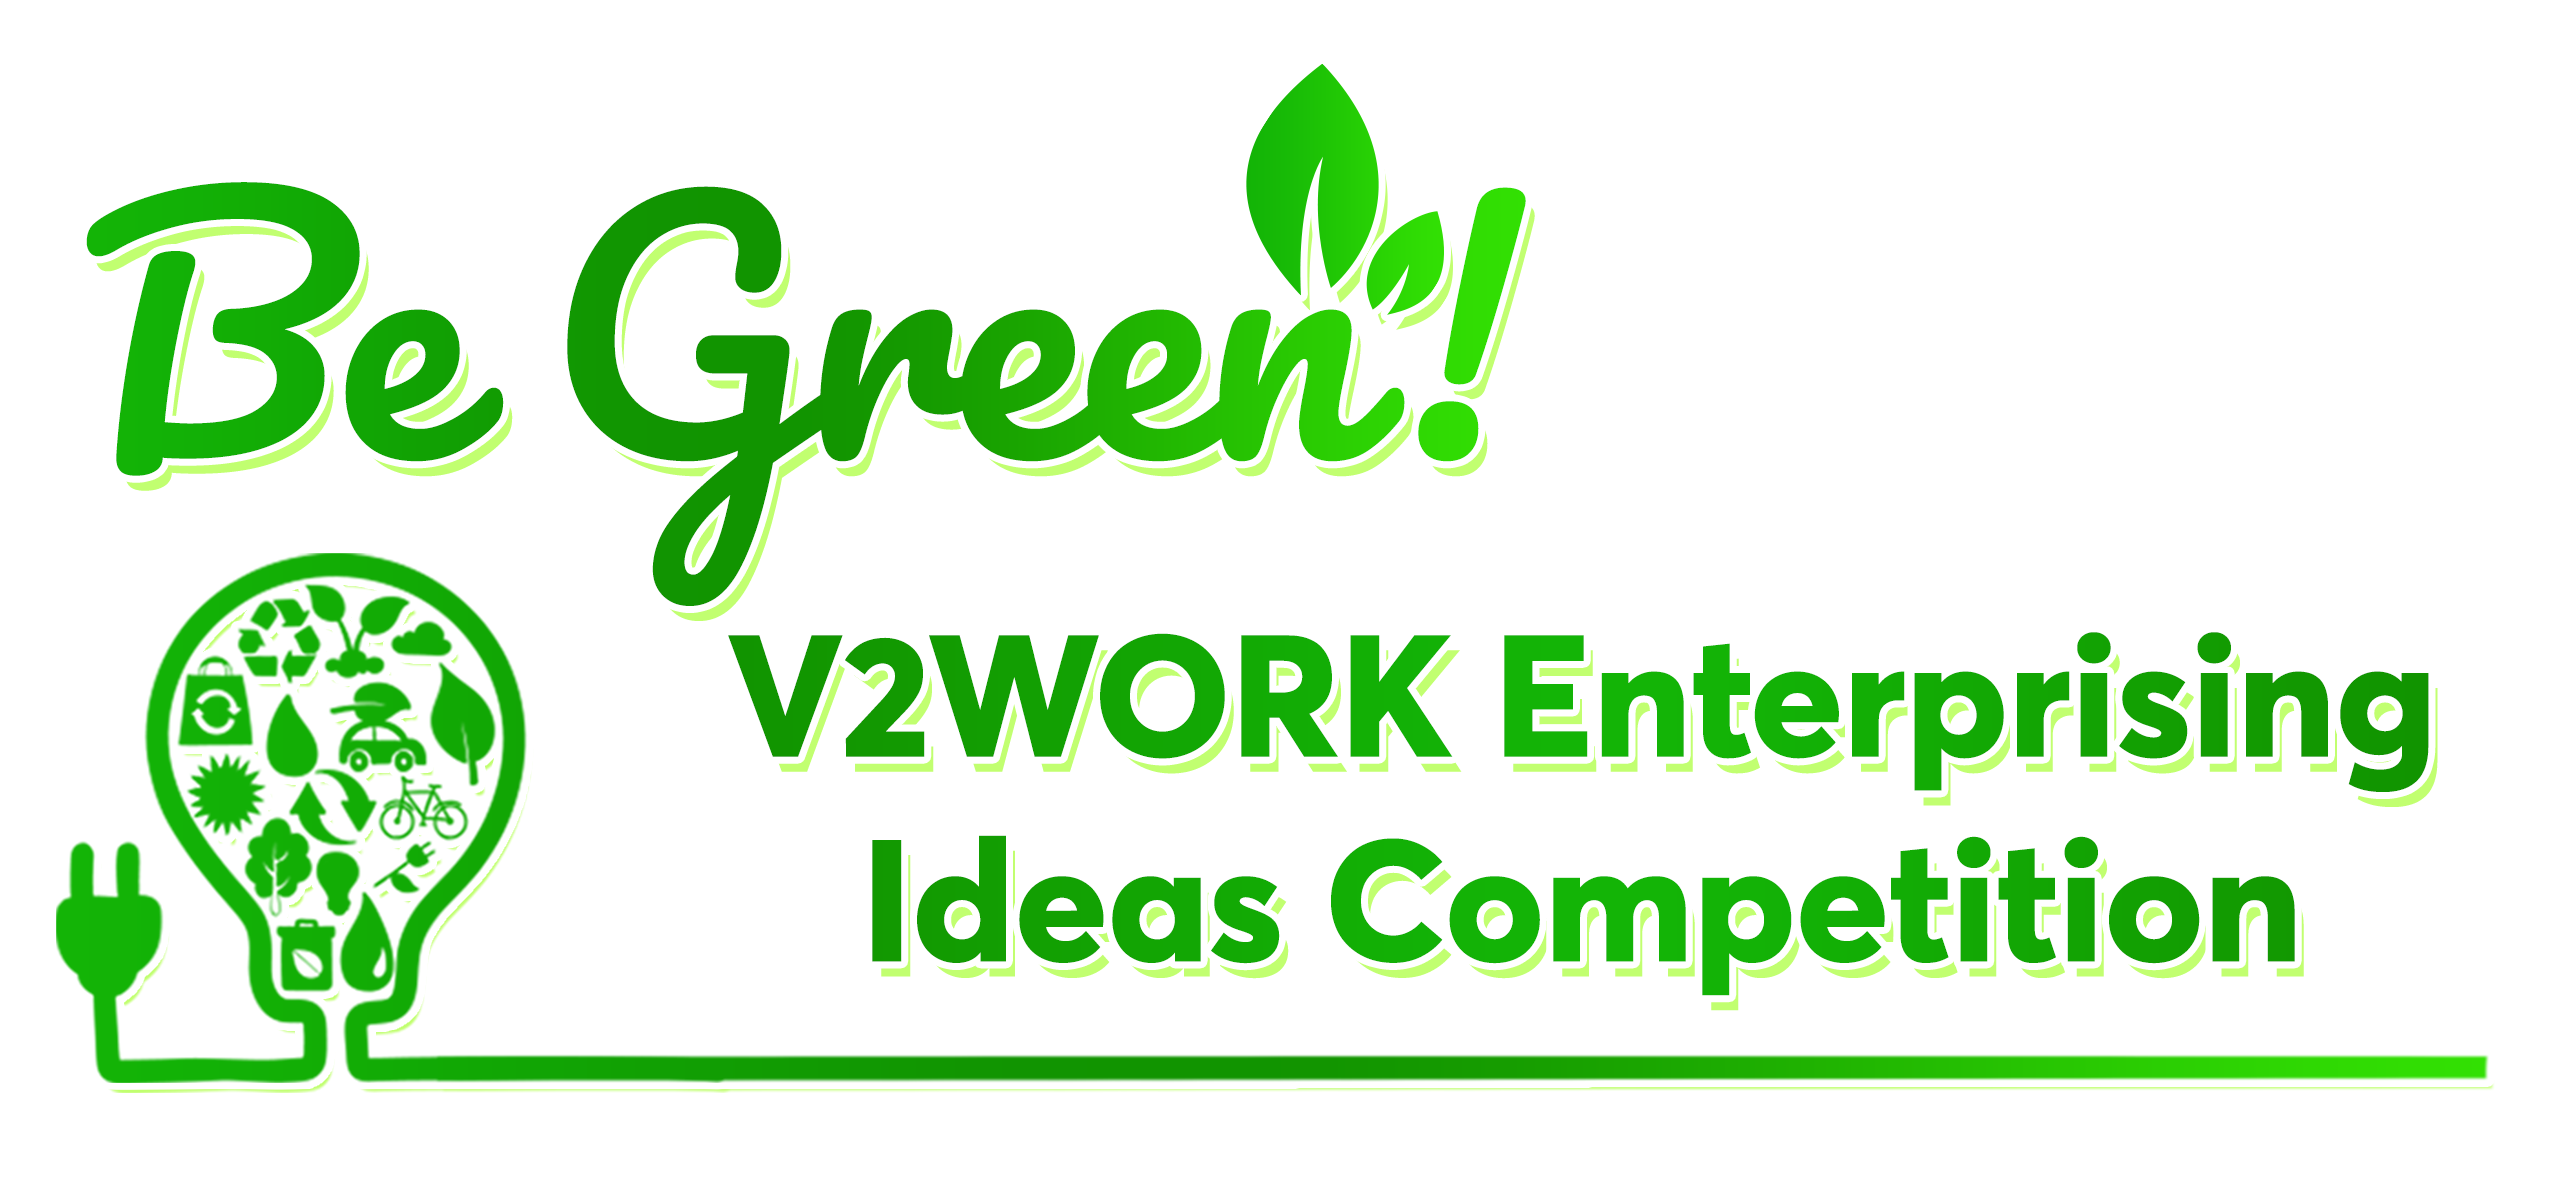 Be Green! V2WORK Enterprising Ideas Competition